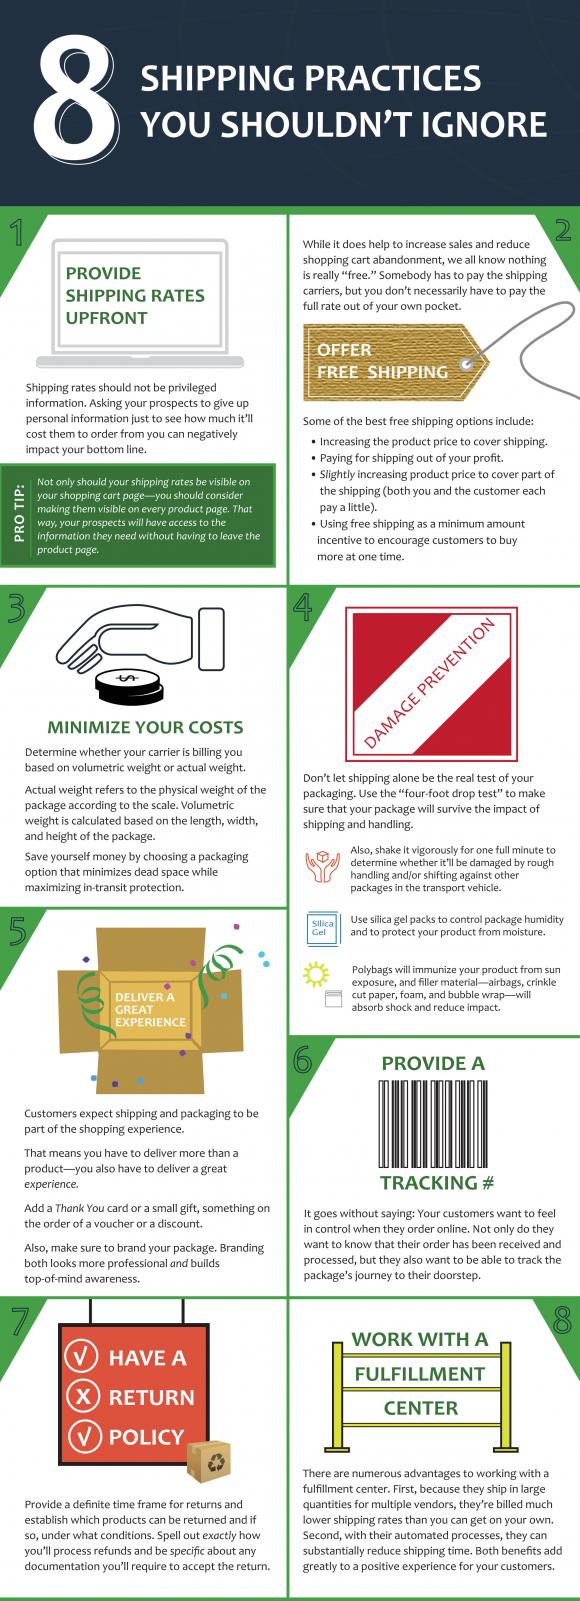 Infographic outlining the eight shipping practices that can't be ignored.